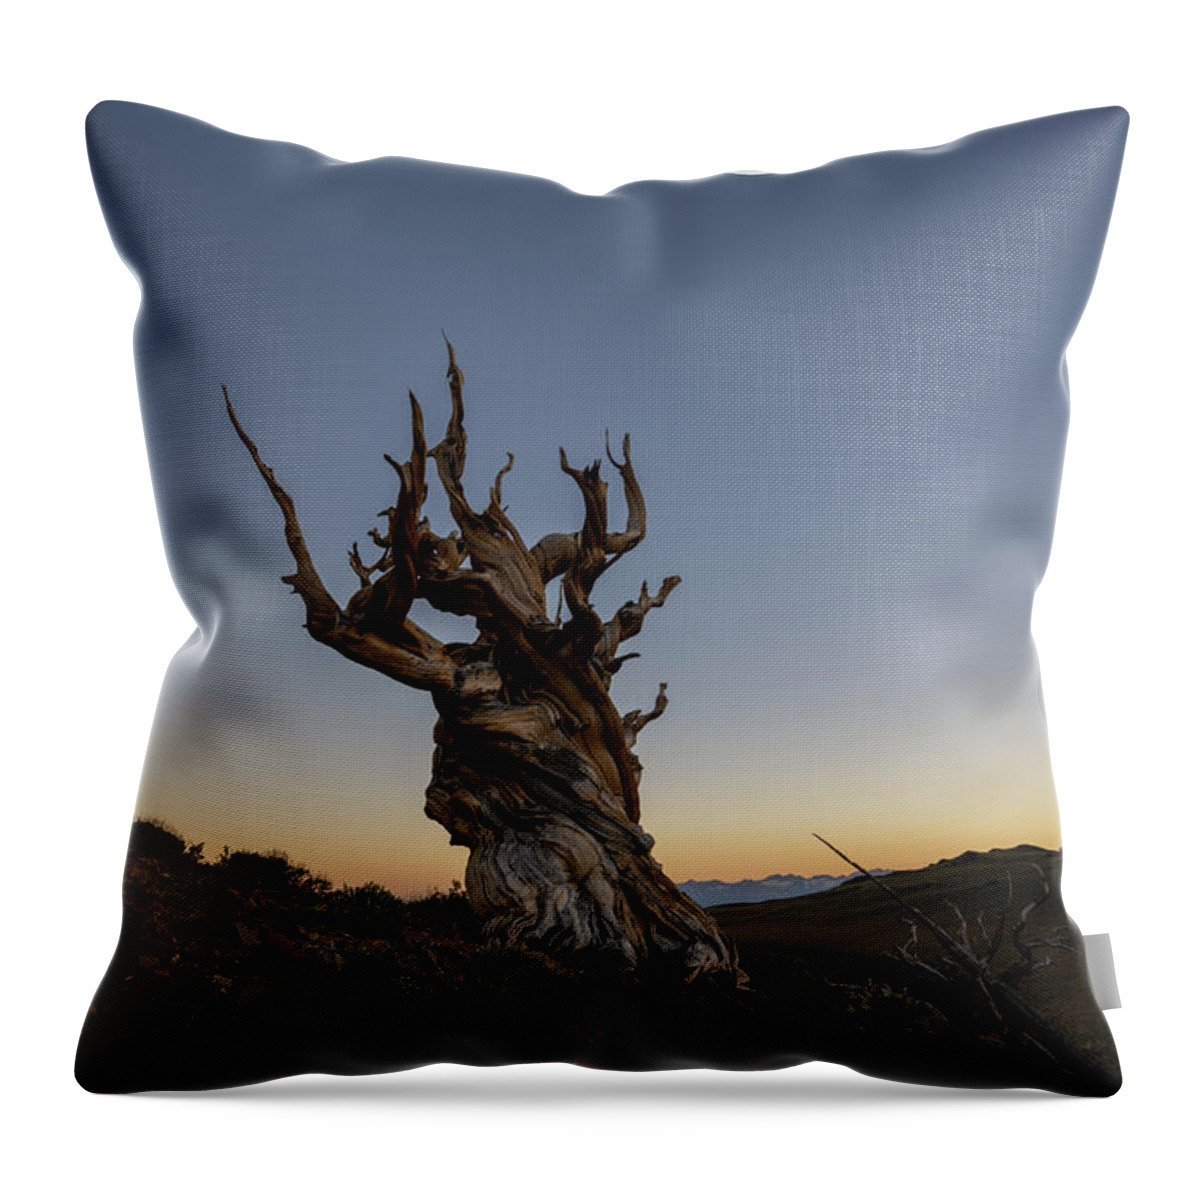 Sunset Throw Pillow featuring the photograph Methuselah Moon by Michael Ver Sprill